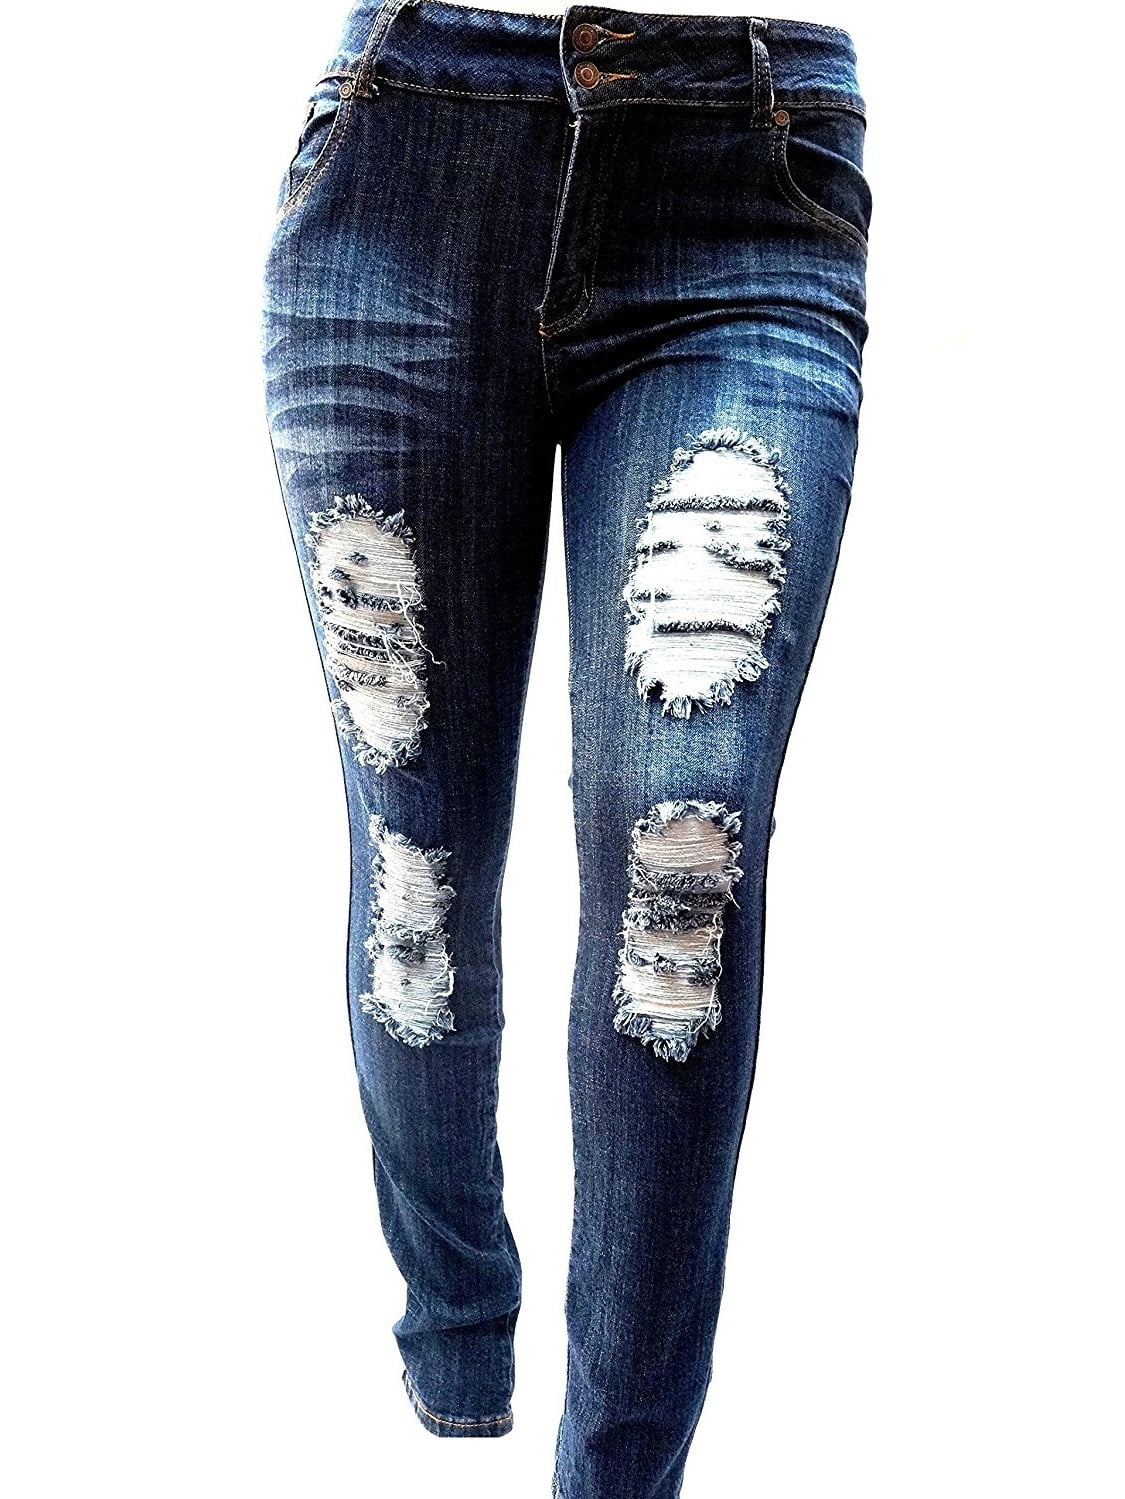 Women Ripped Jeans Rose Embroidered Denim Destroyed  Skinny jeans Size 10-14